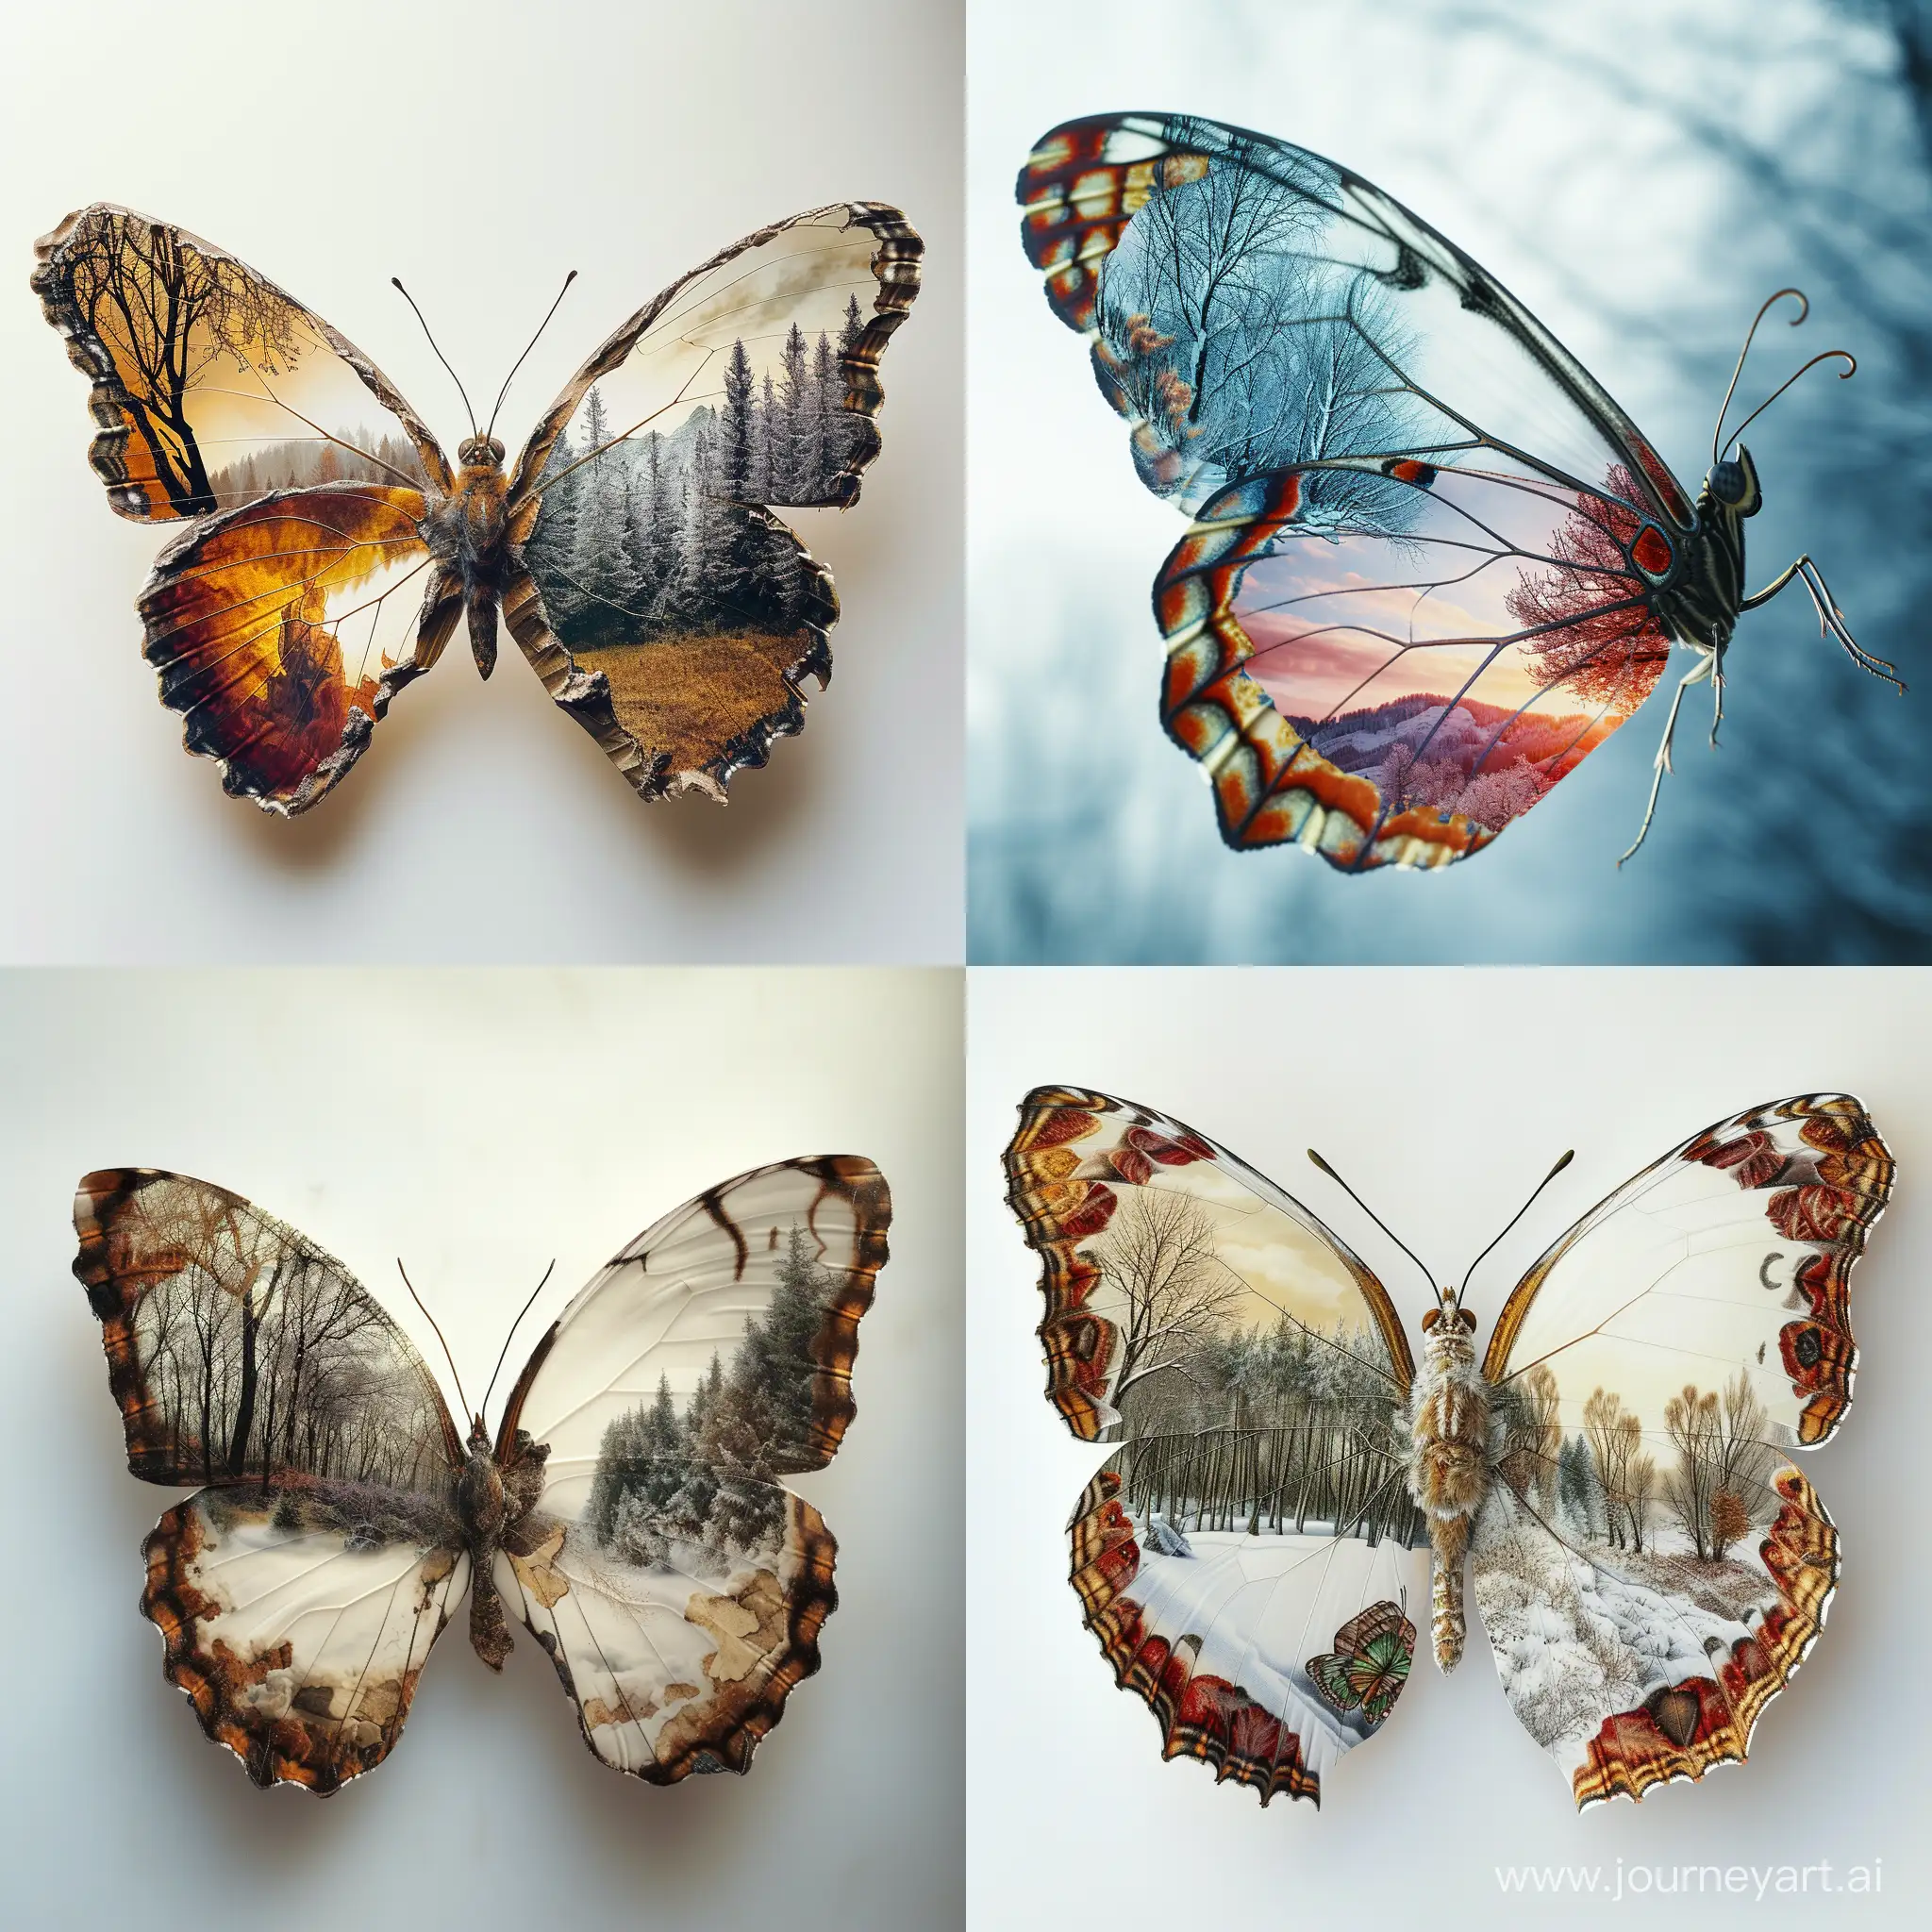 Winter-and-Summer-Butterfly-Contrasting-Seasons-in-One-Winged-Creature